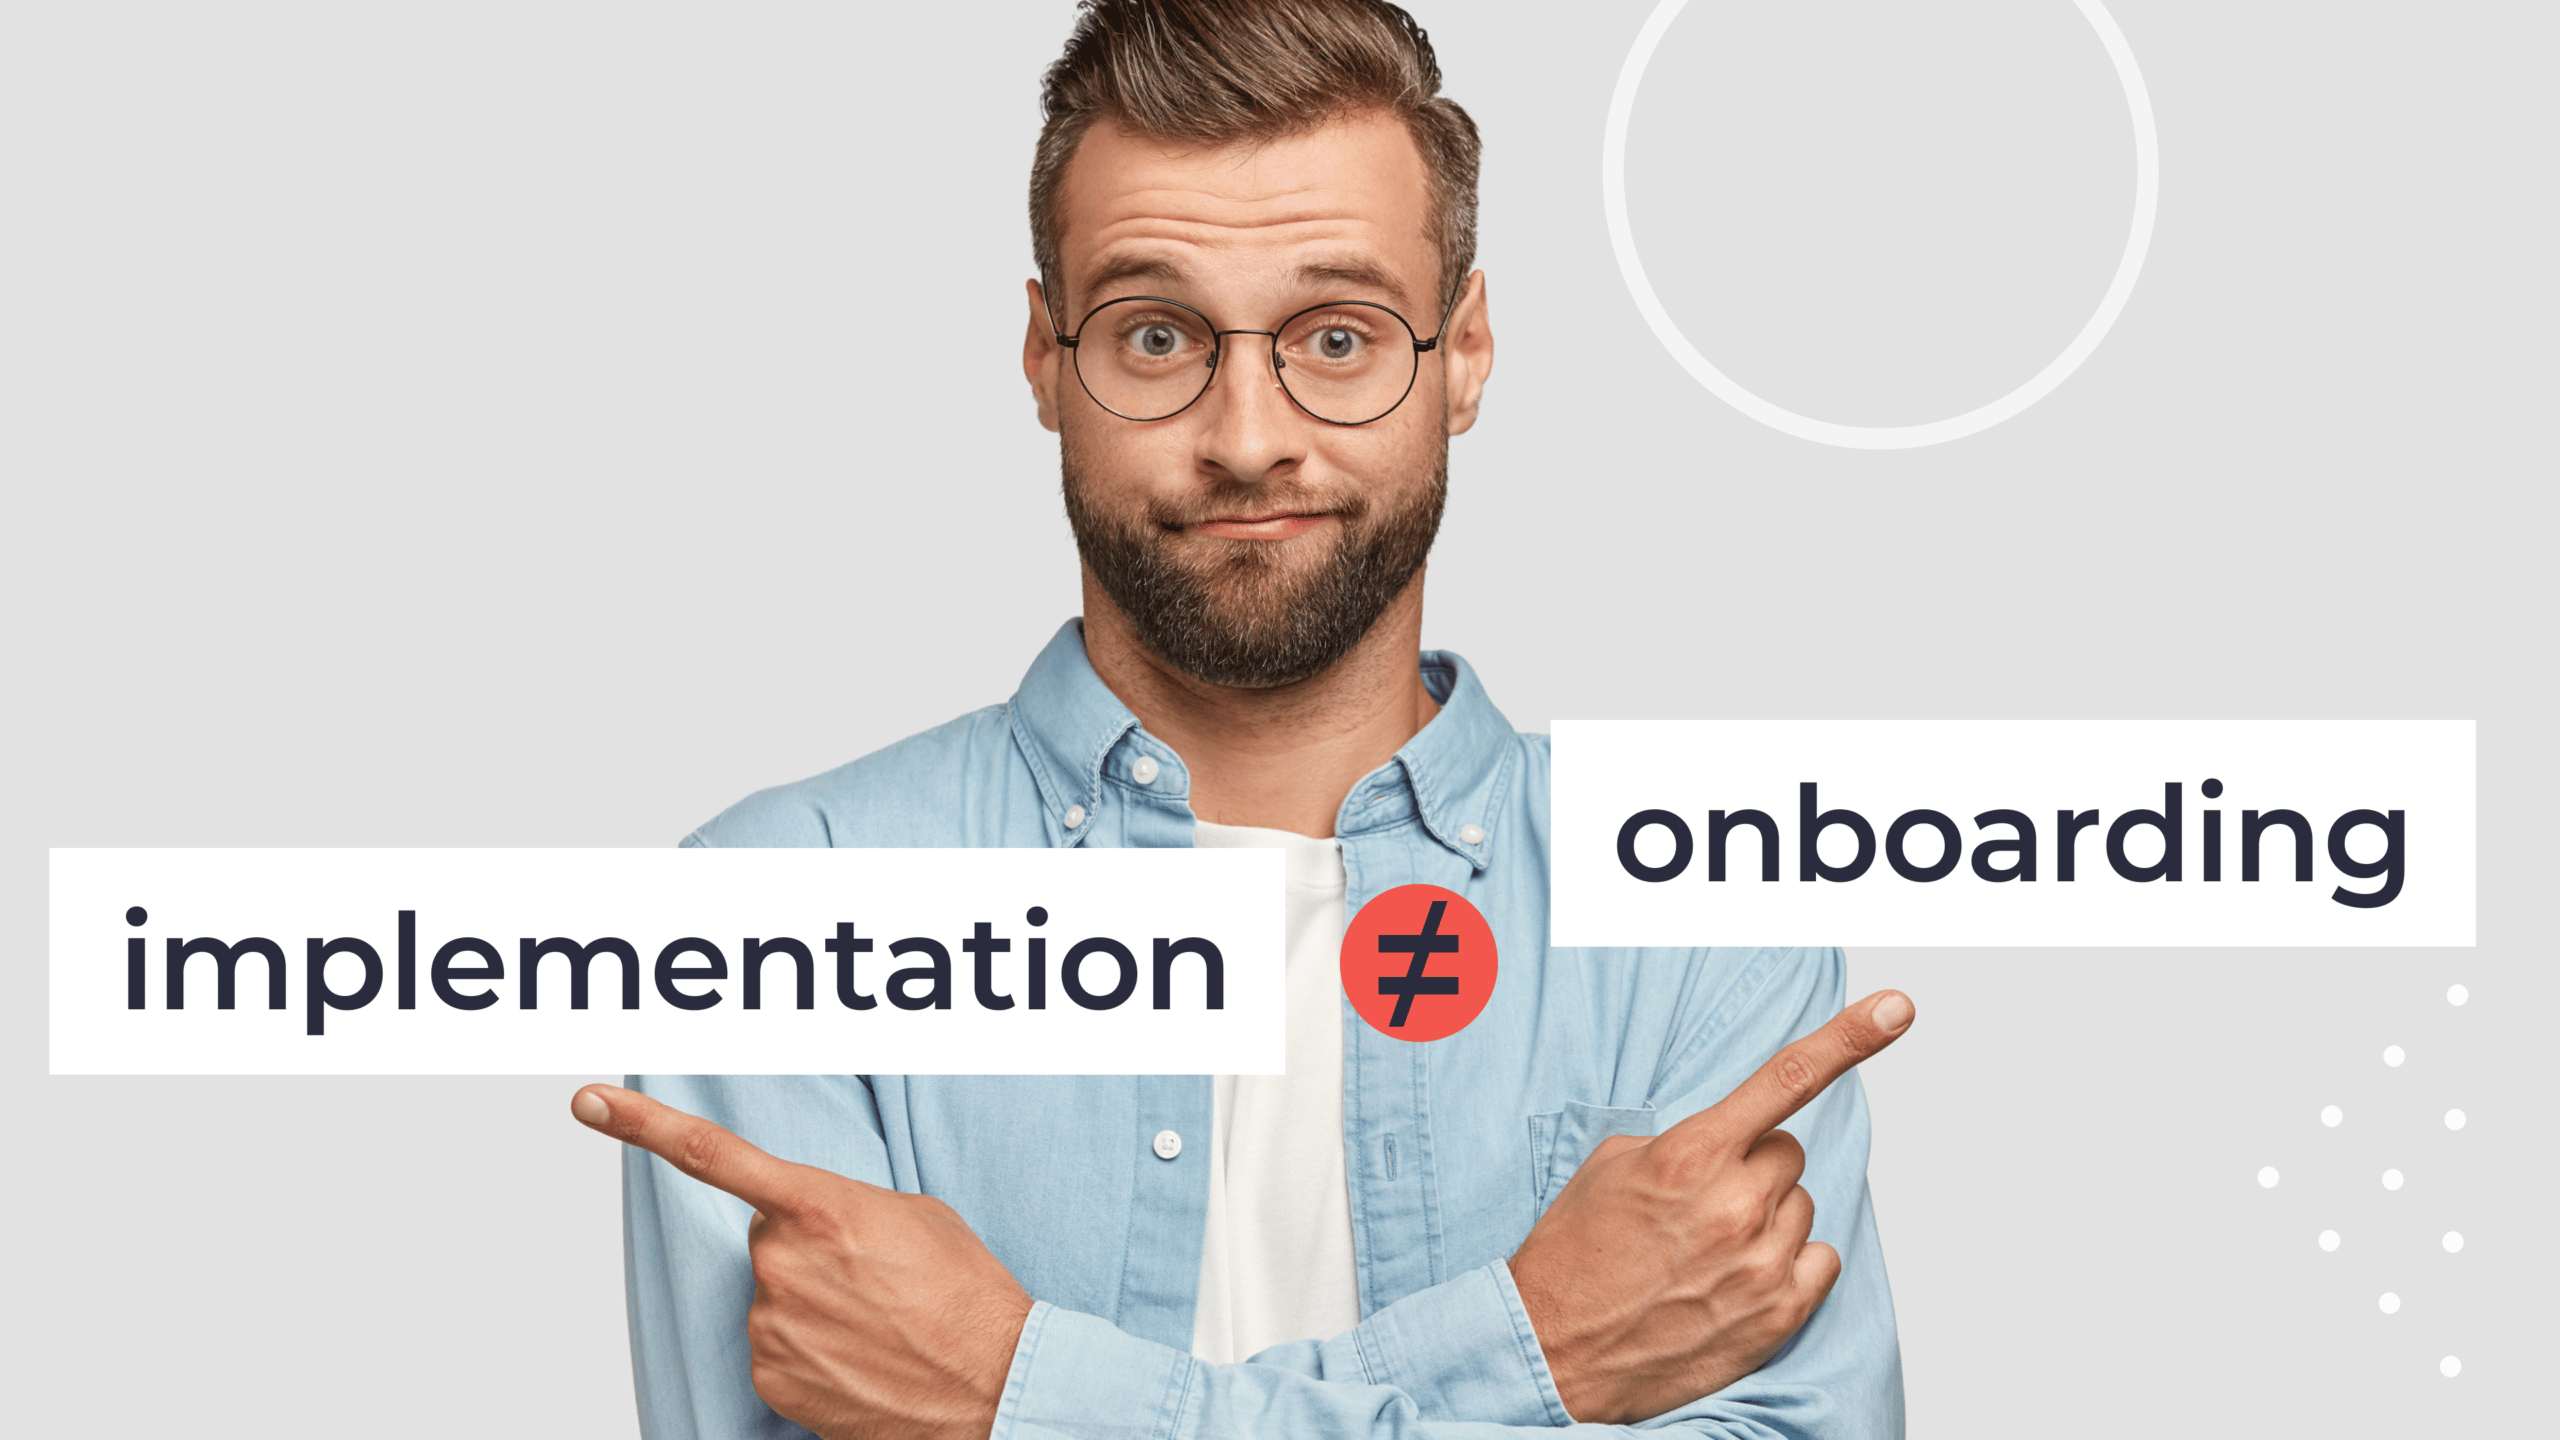 Why Implementation isn’t Onboarding